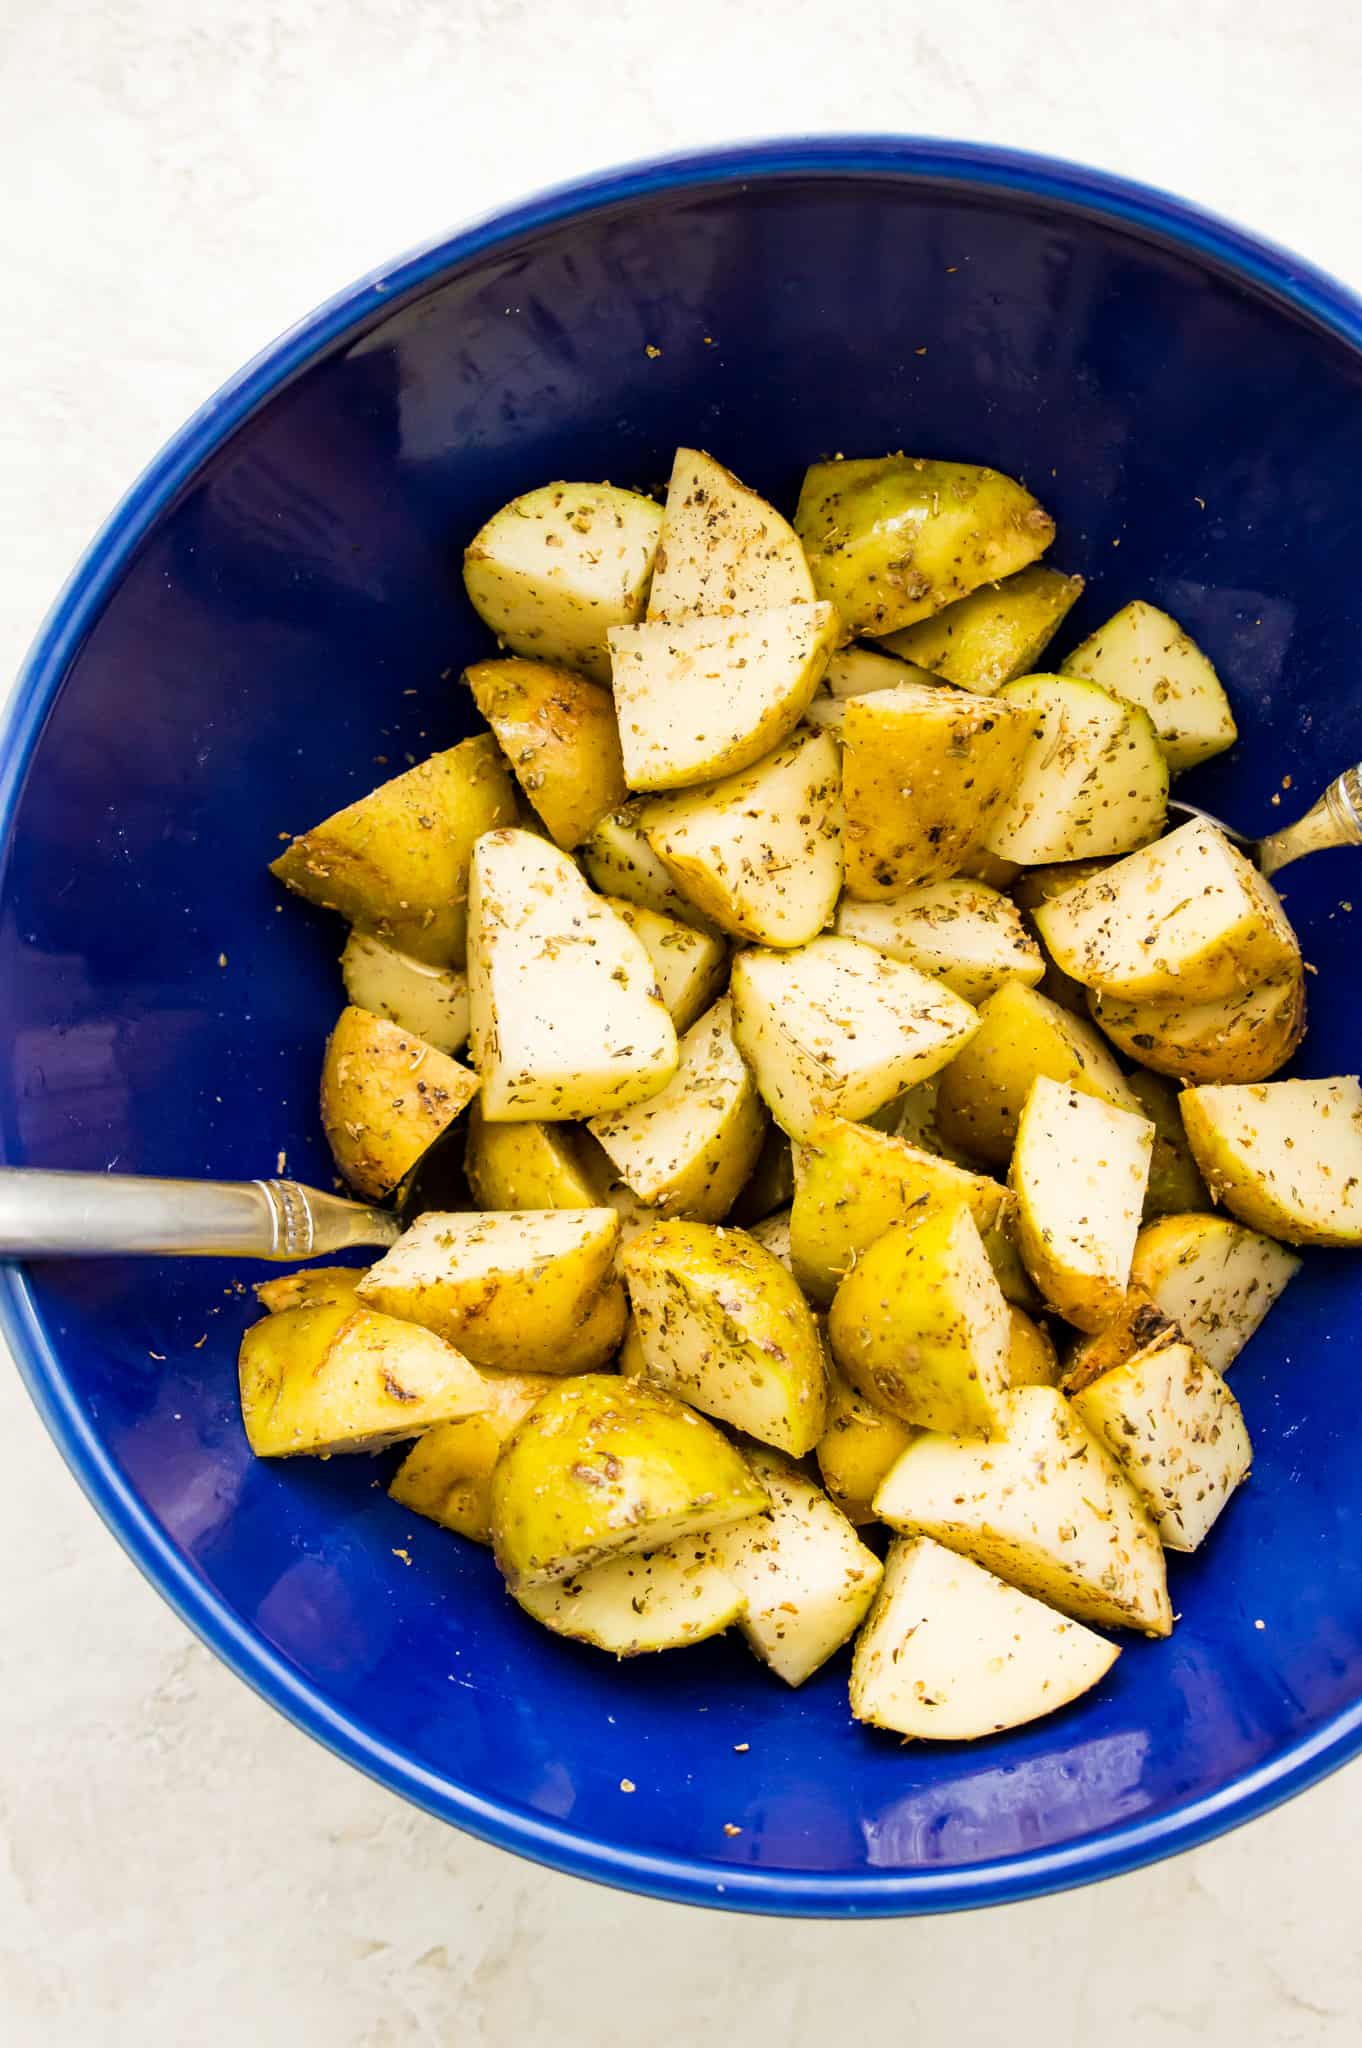 A bowl of raw, chopped potatoes with seasoning on them.